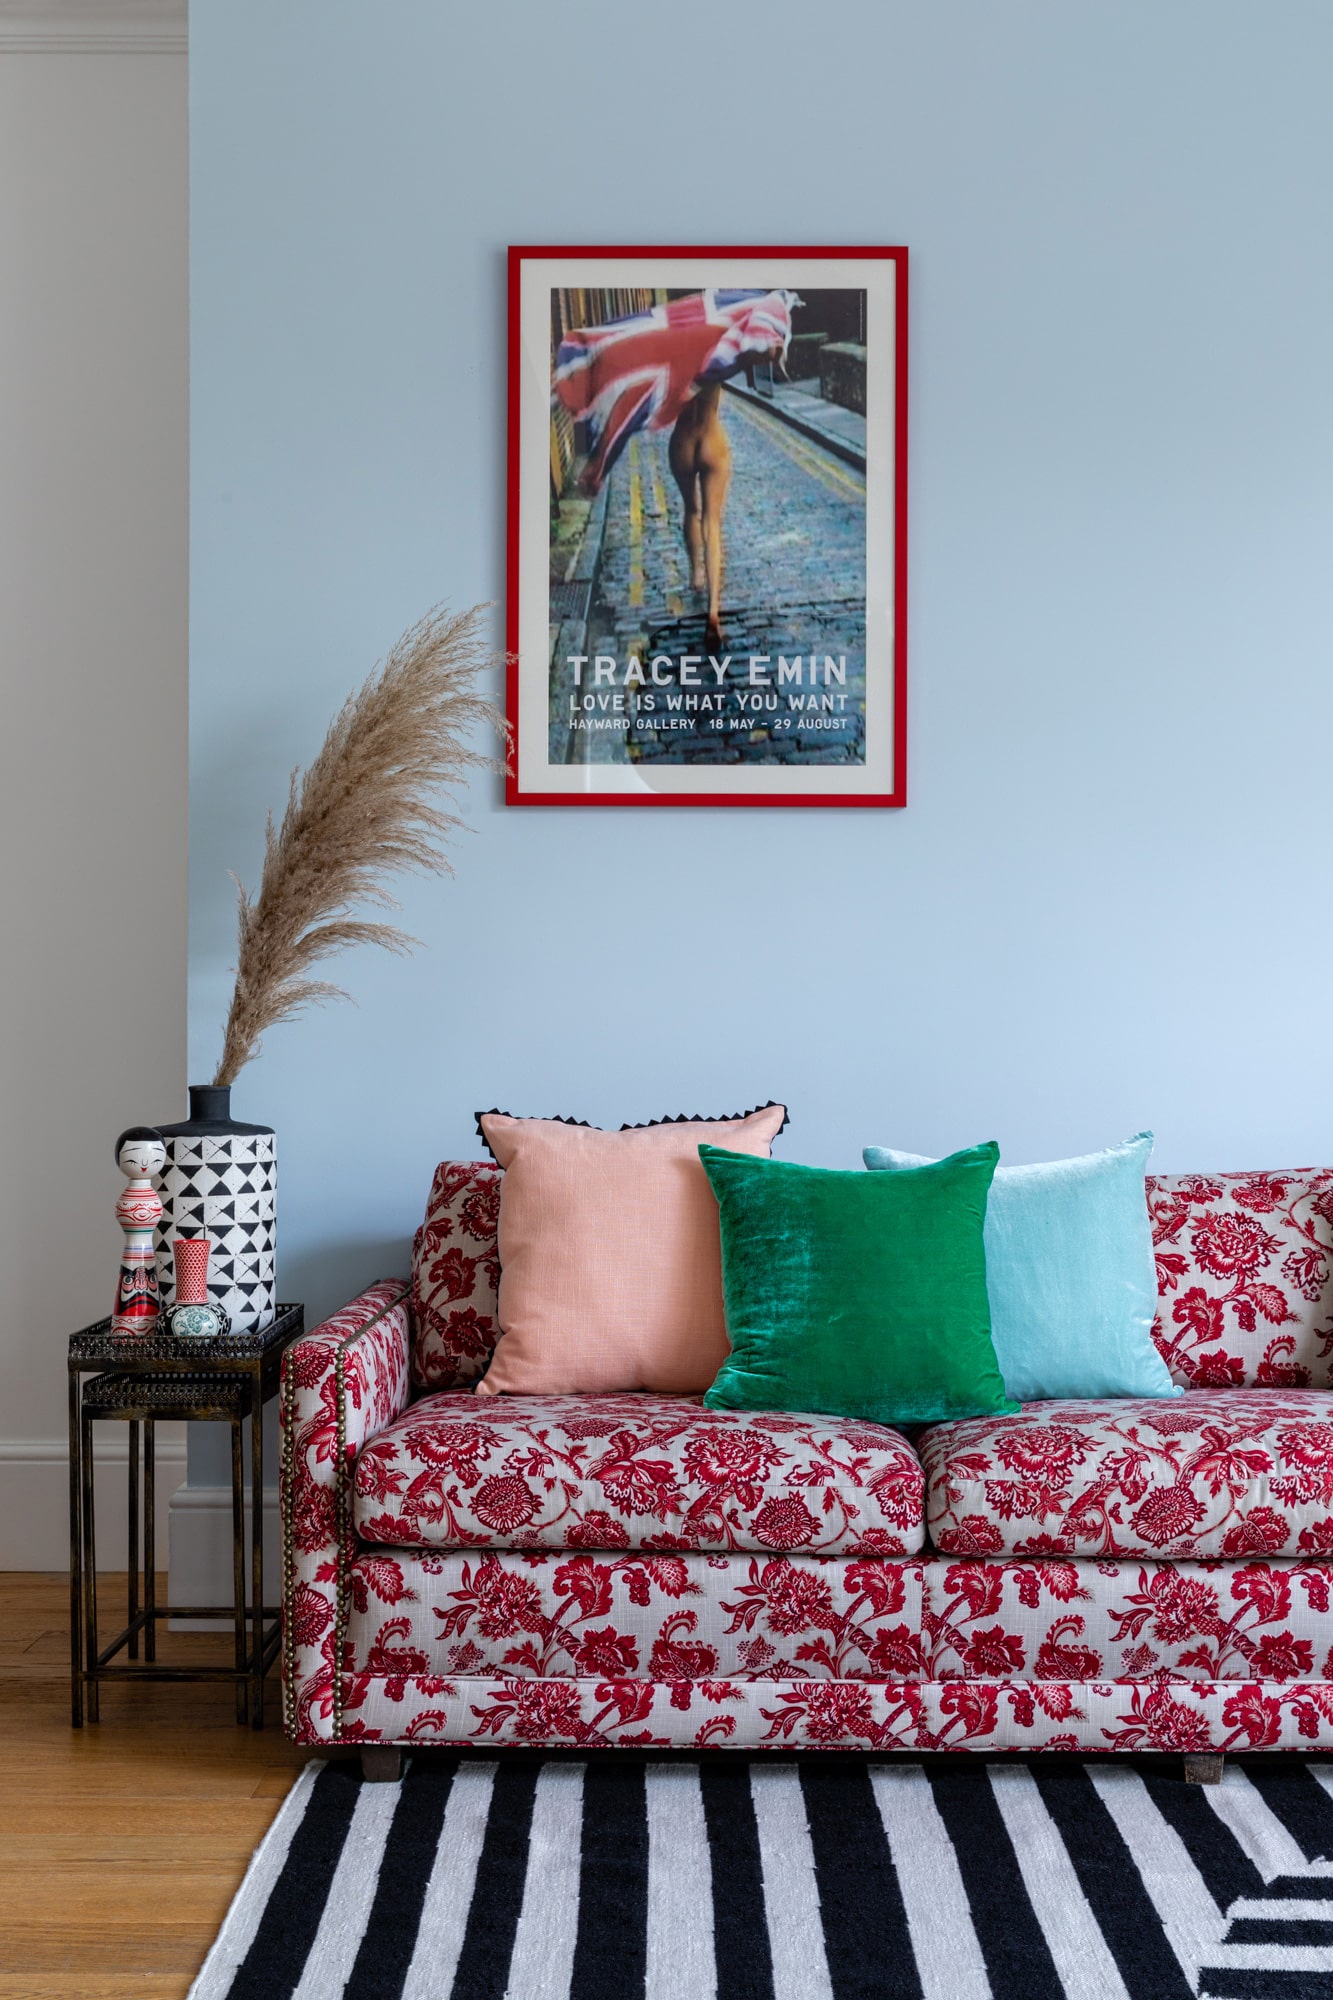 Interior photo of a living room: light blue walls; sofa with red pattern; colourful cushions; Tracey Emin poster; black and white striped rug